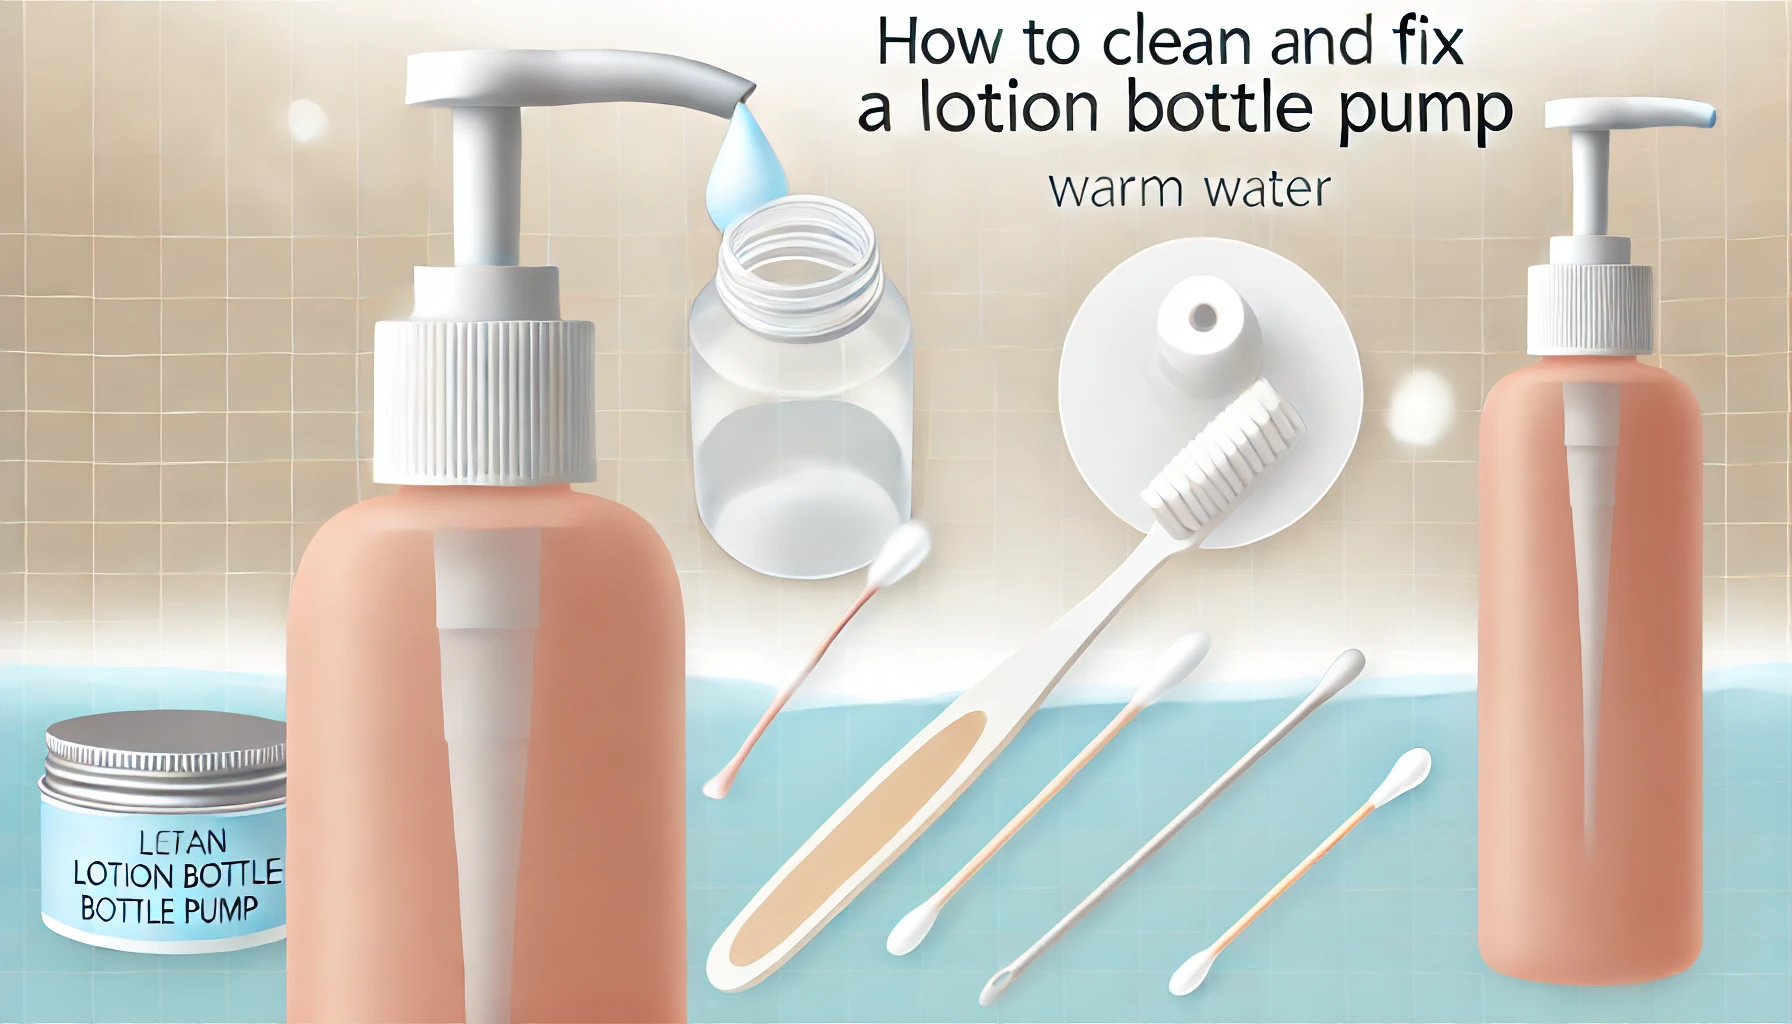 How to Clean and Fix a Lotion Bottle Pump